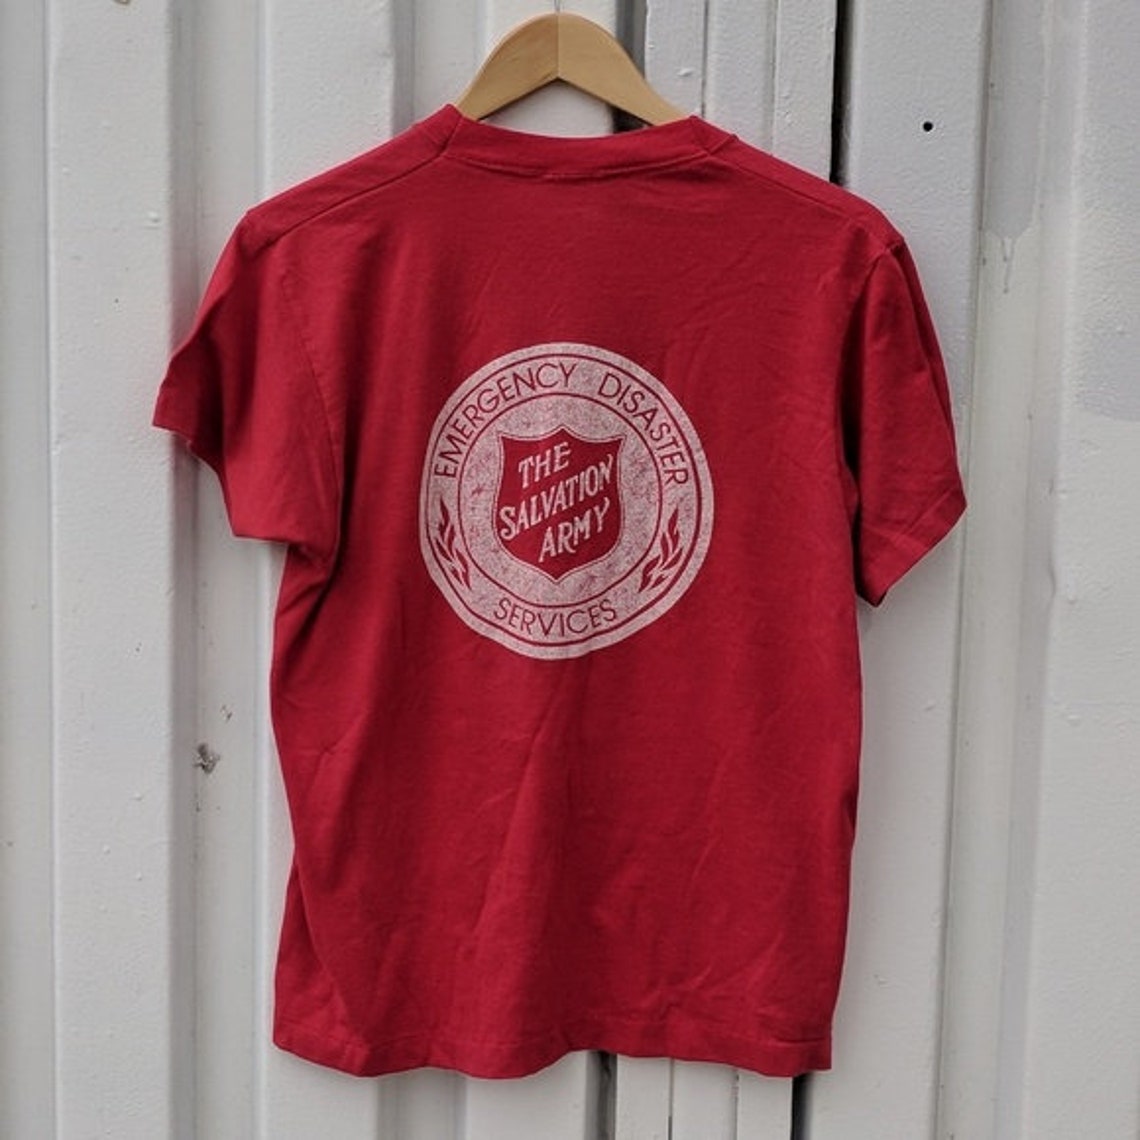 Vintage Salvation Army T-shirt | Etsy